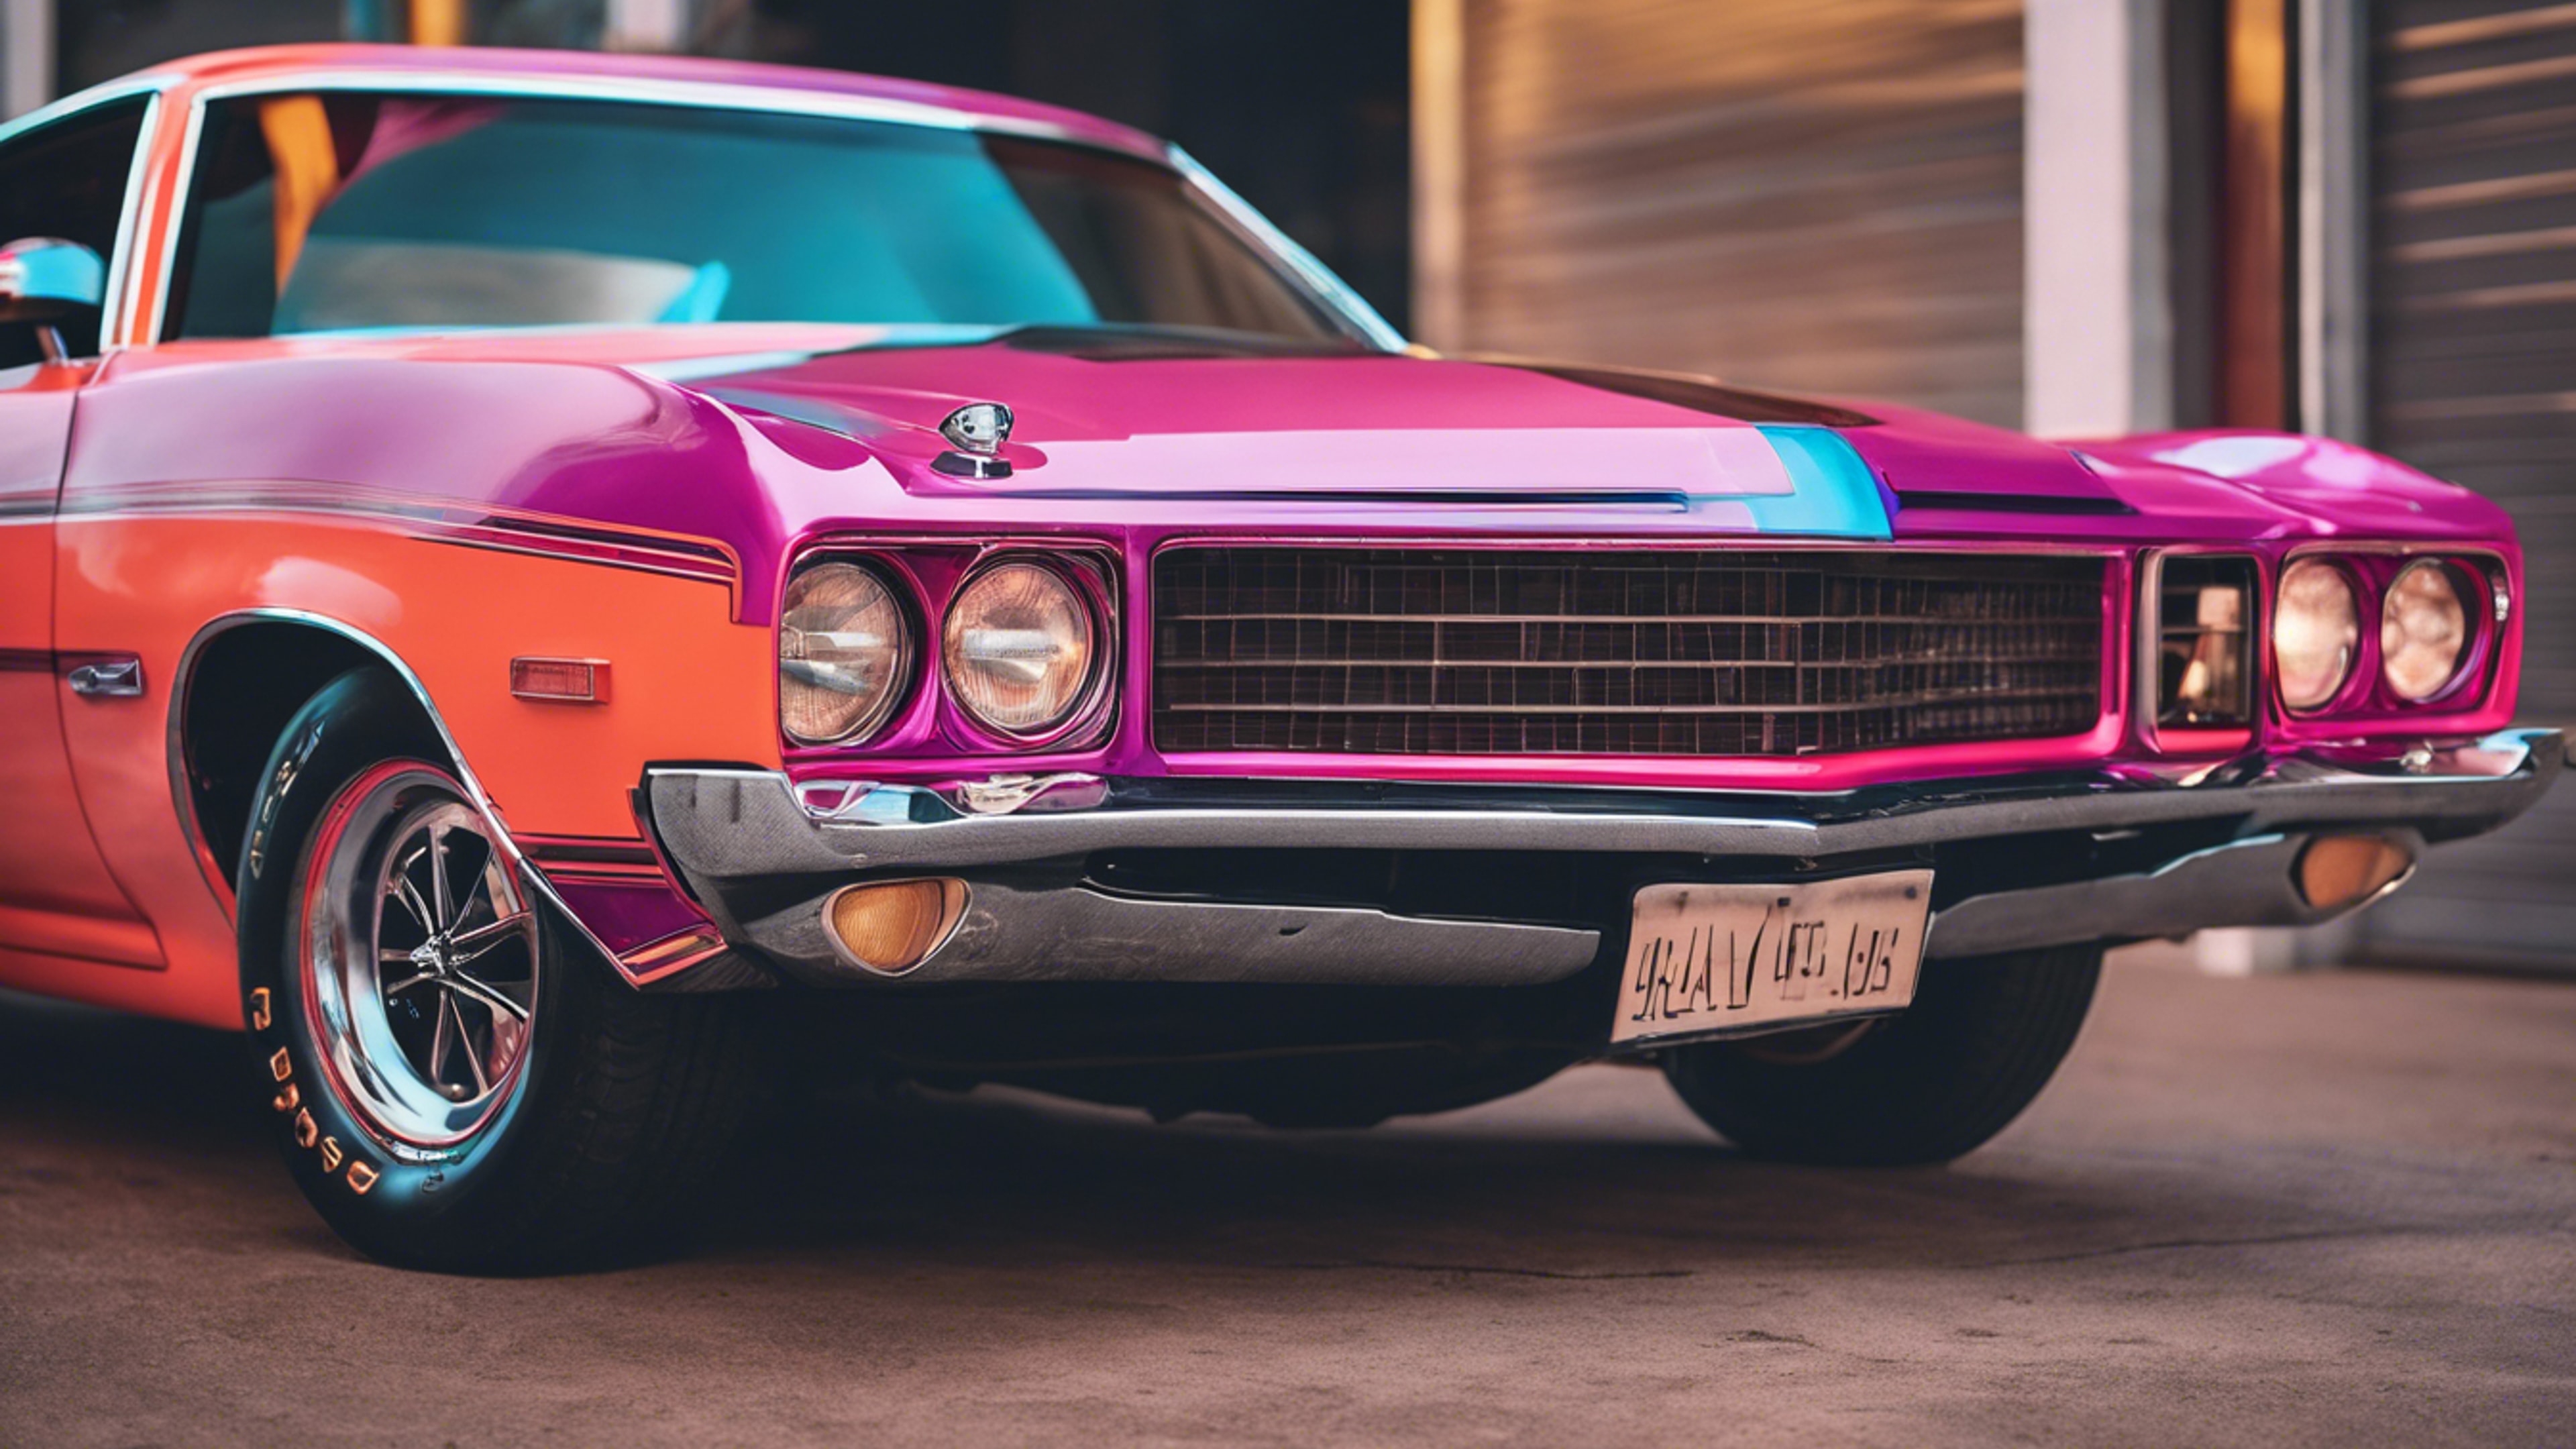 A classic American muscle car from the 1970s, printed in bright neon colors วอลล์เปเปอร์[fa60d4cf89e348ffade4]